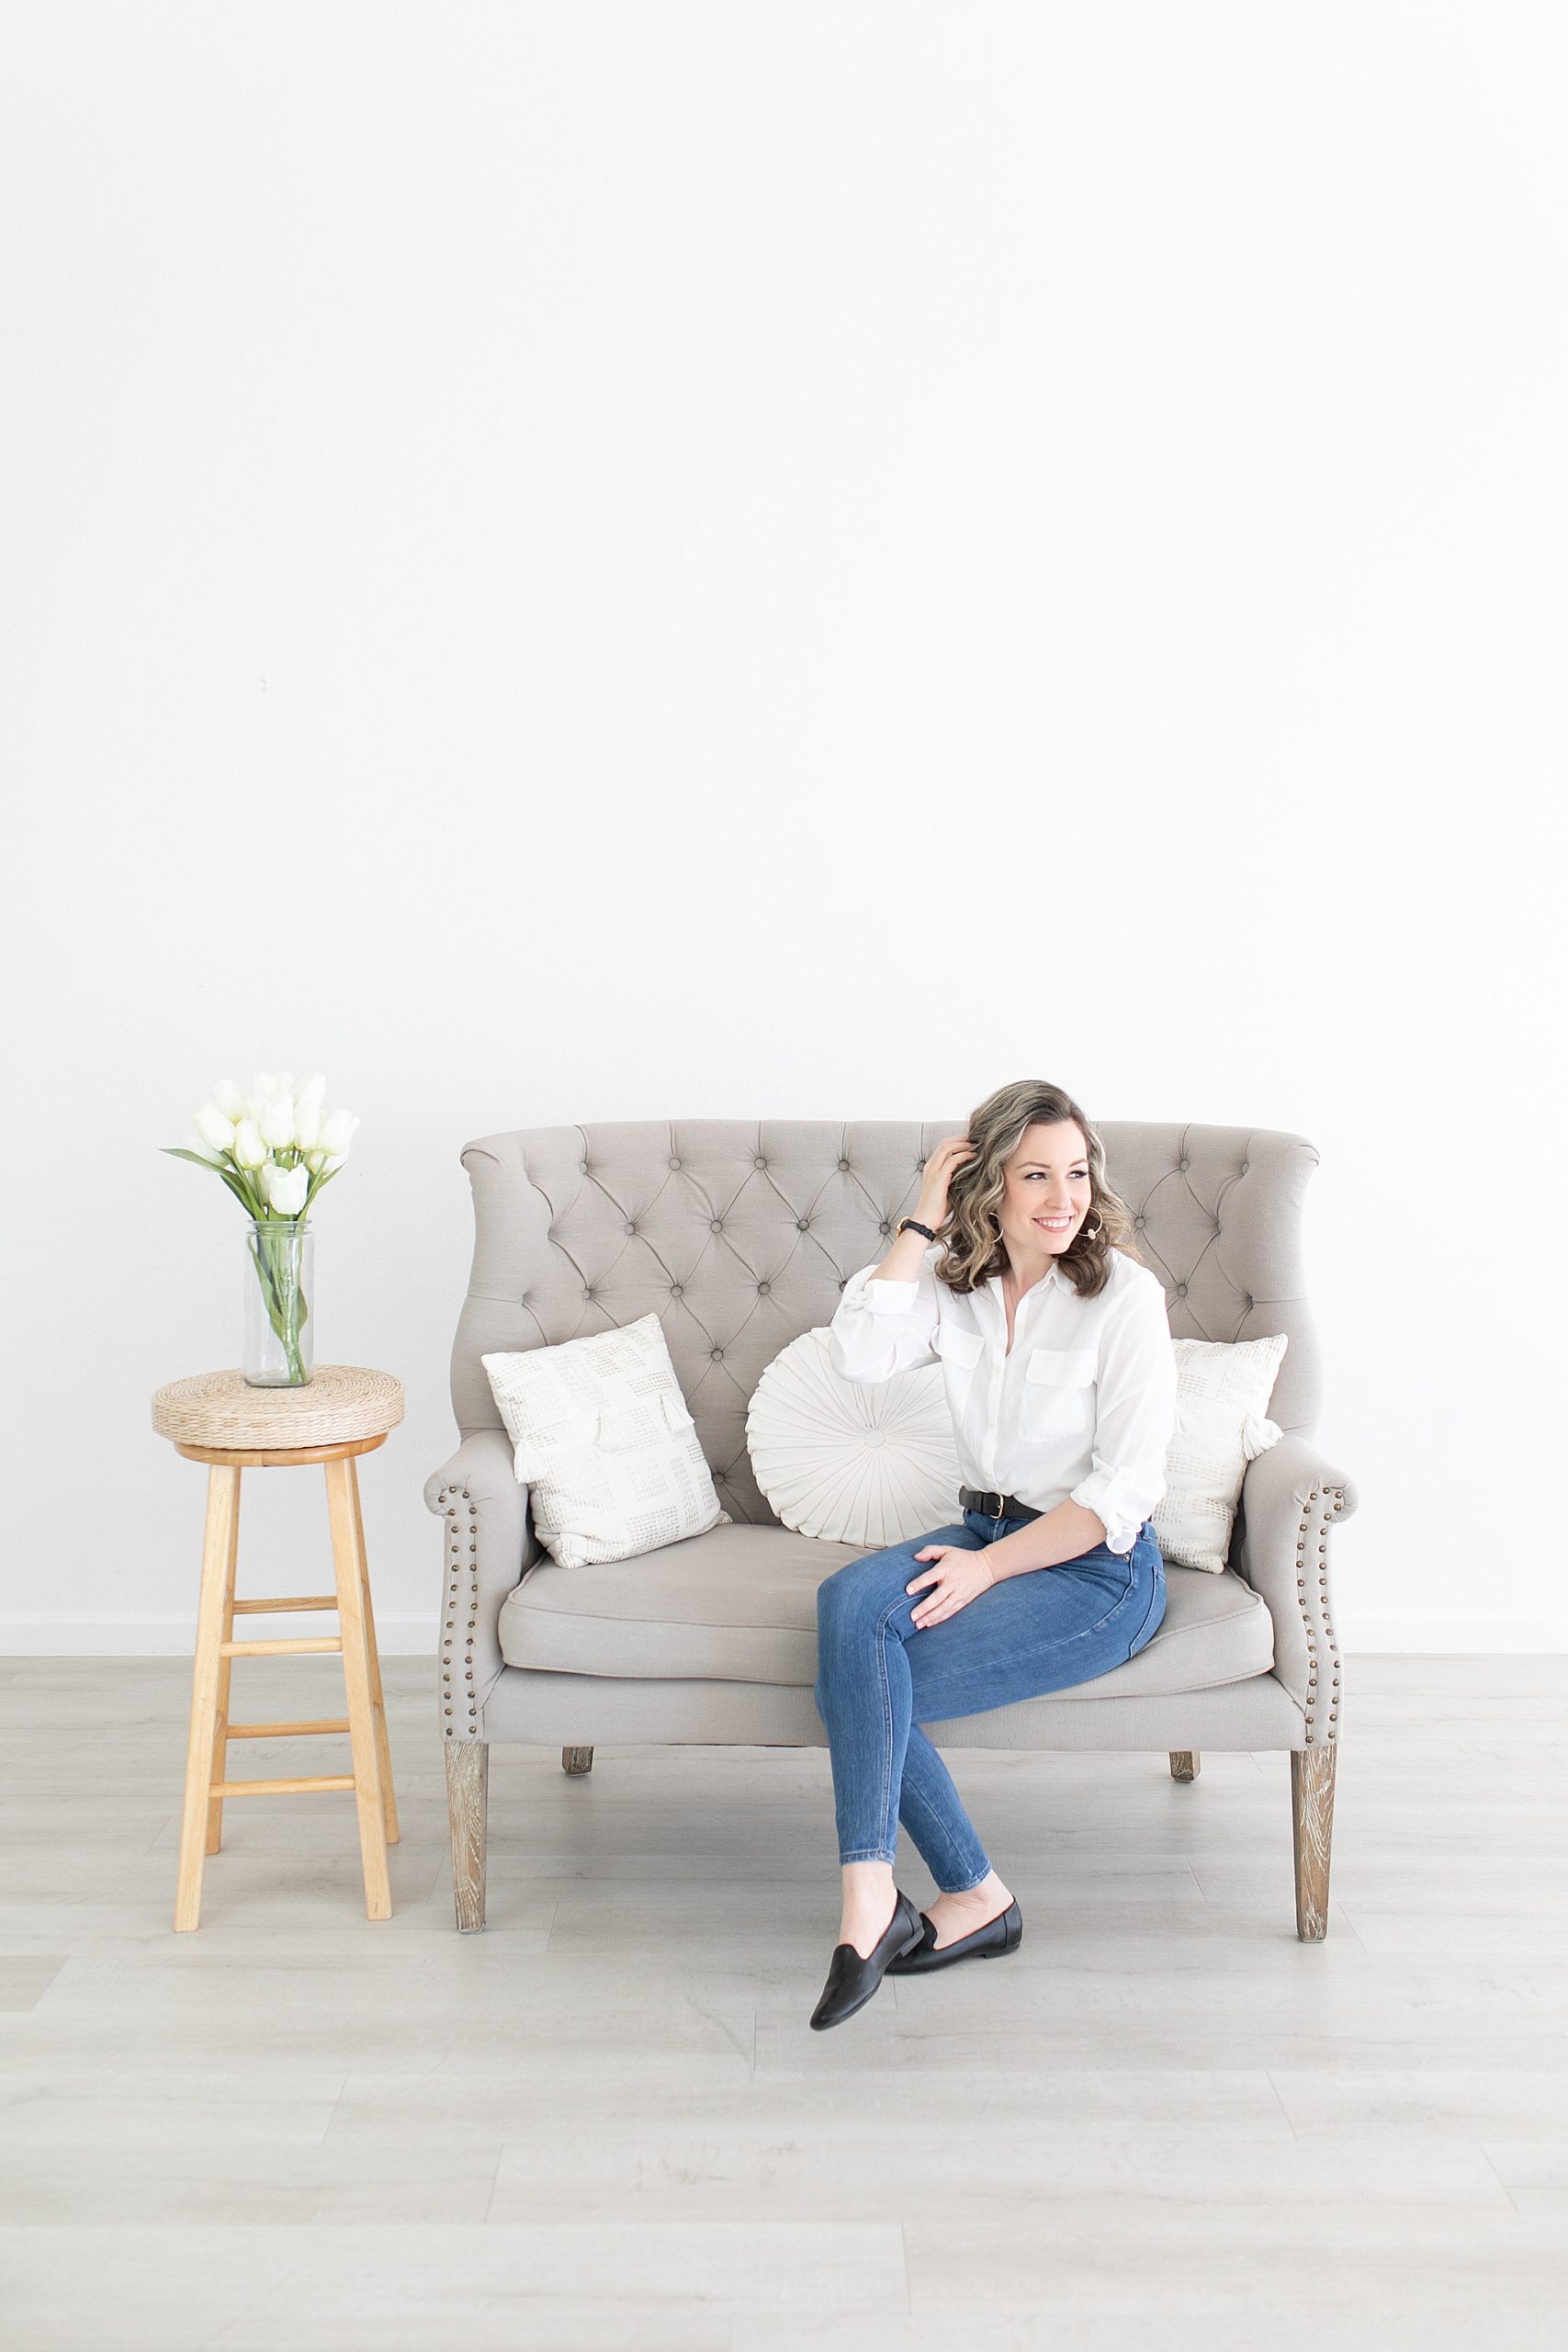 wedding planner sits on couch during branding session